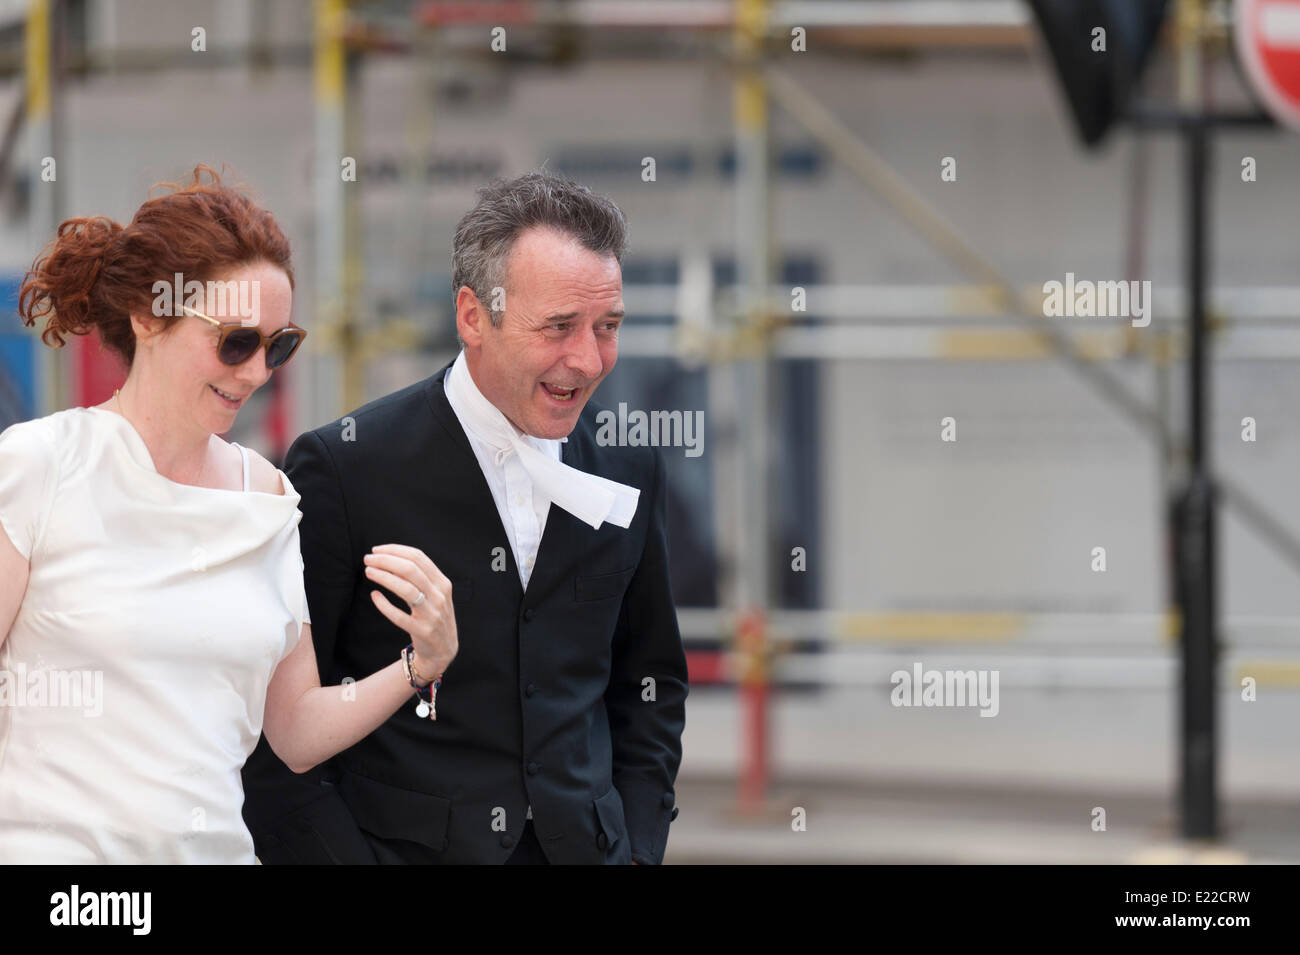 Old Bailey, London, UK. 13th June, 2014. Former CEO of News International, Rebekah Brooks, together with her barrister, Jonathan Laidlaw QC, leave the Old Bailey as the jury in the phone-hacking trial continues to consider the verdicts. Credit:  Lee Thomas/Alamy Live News Stock Photo